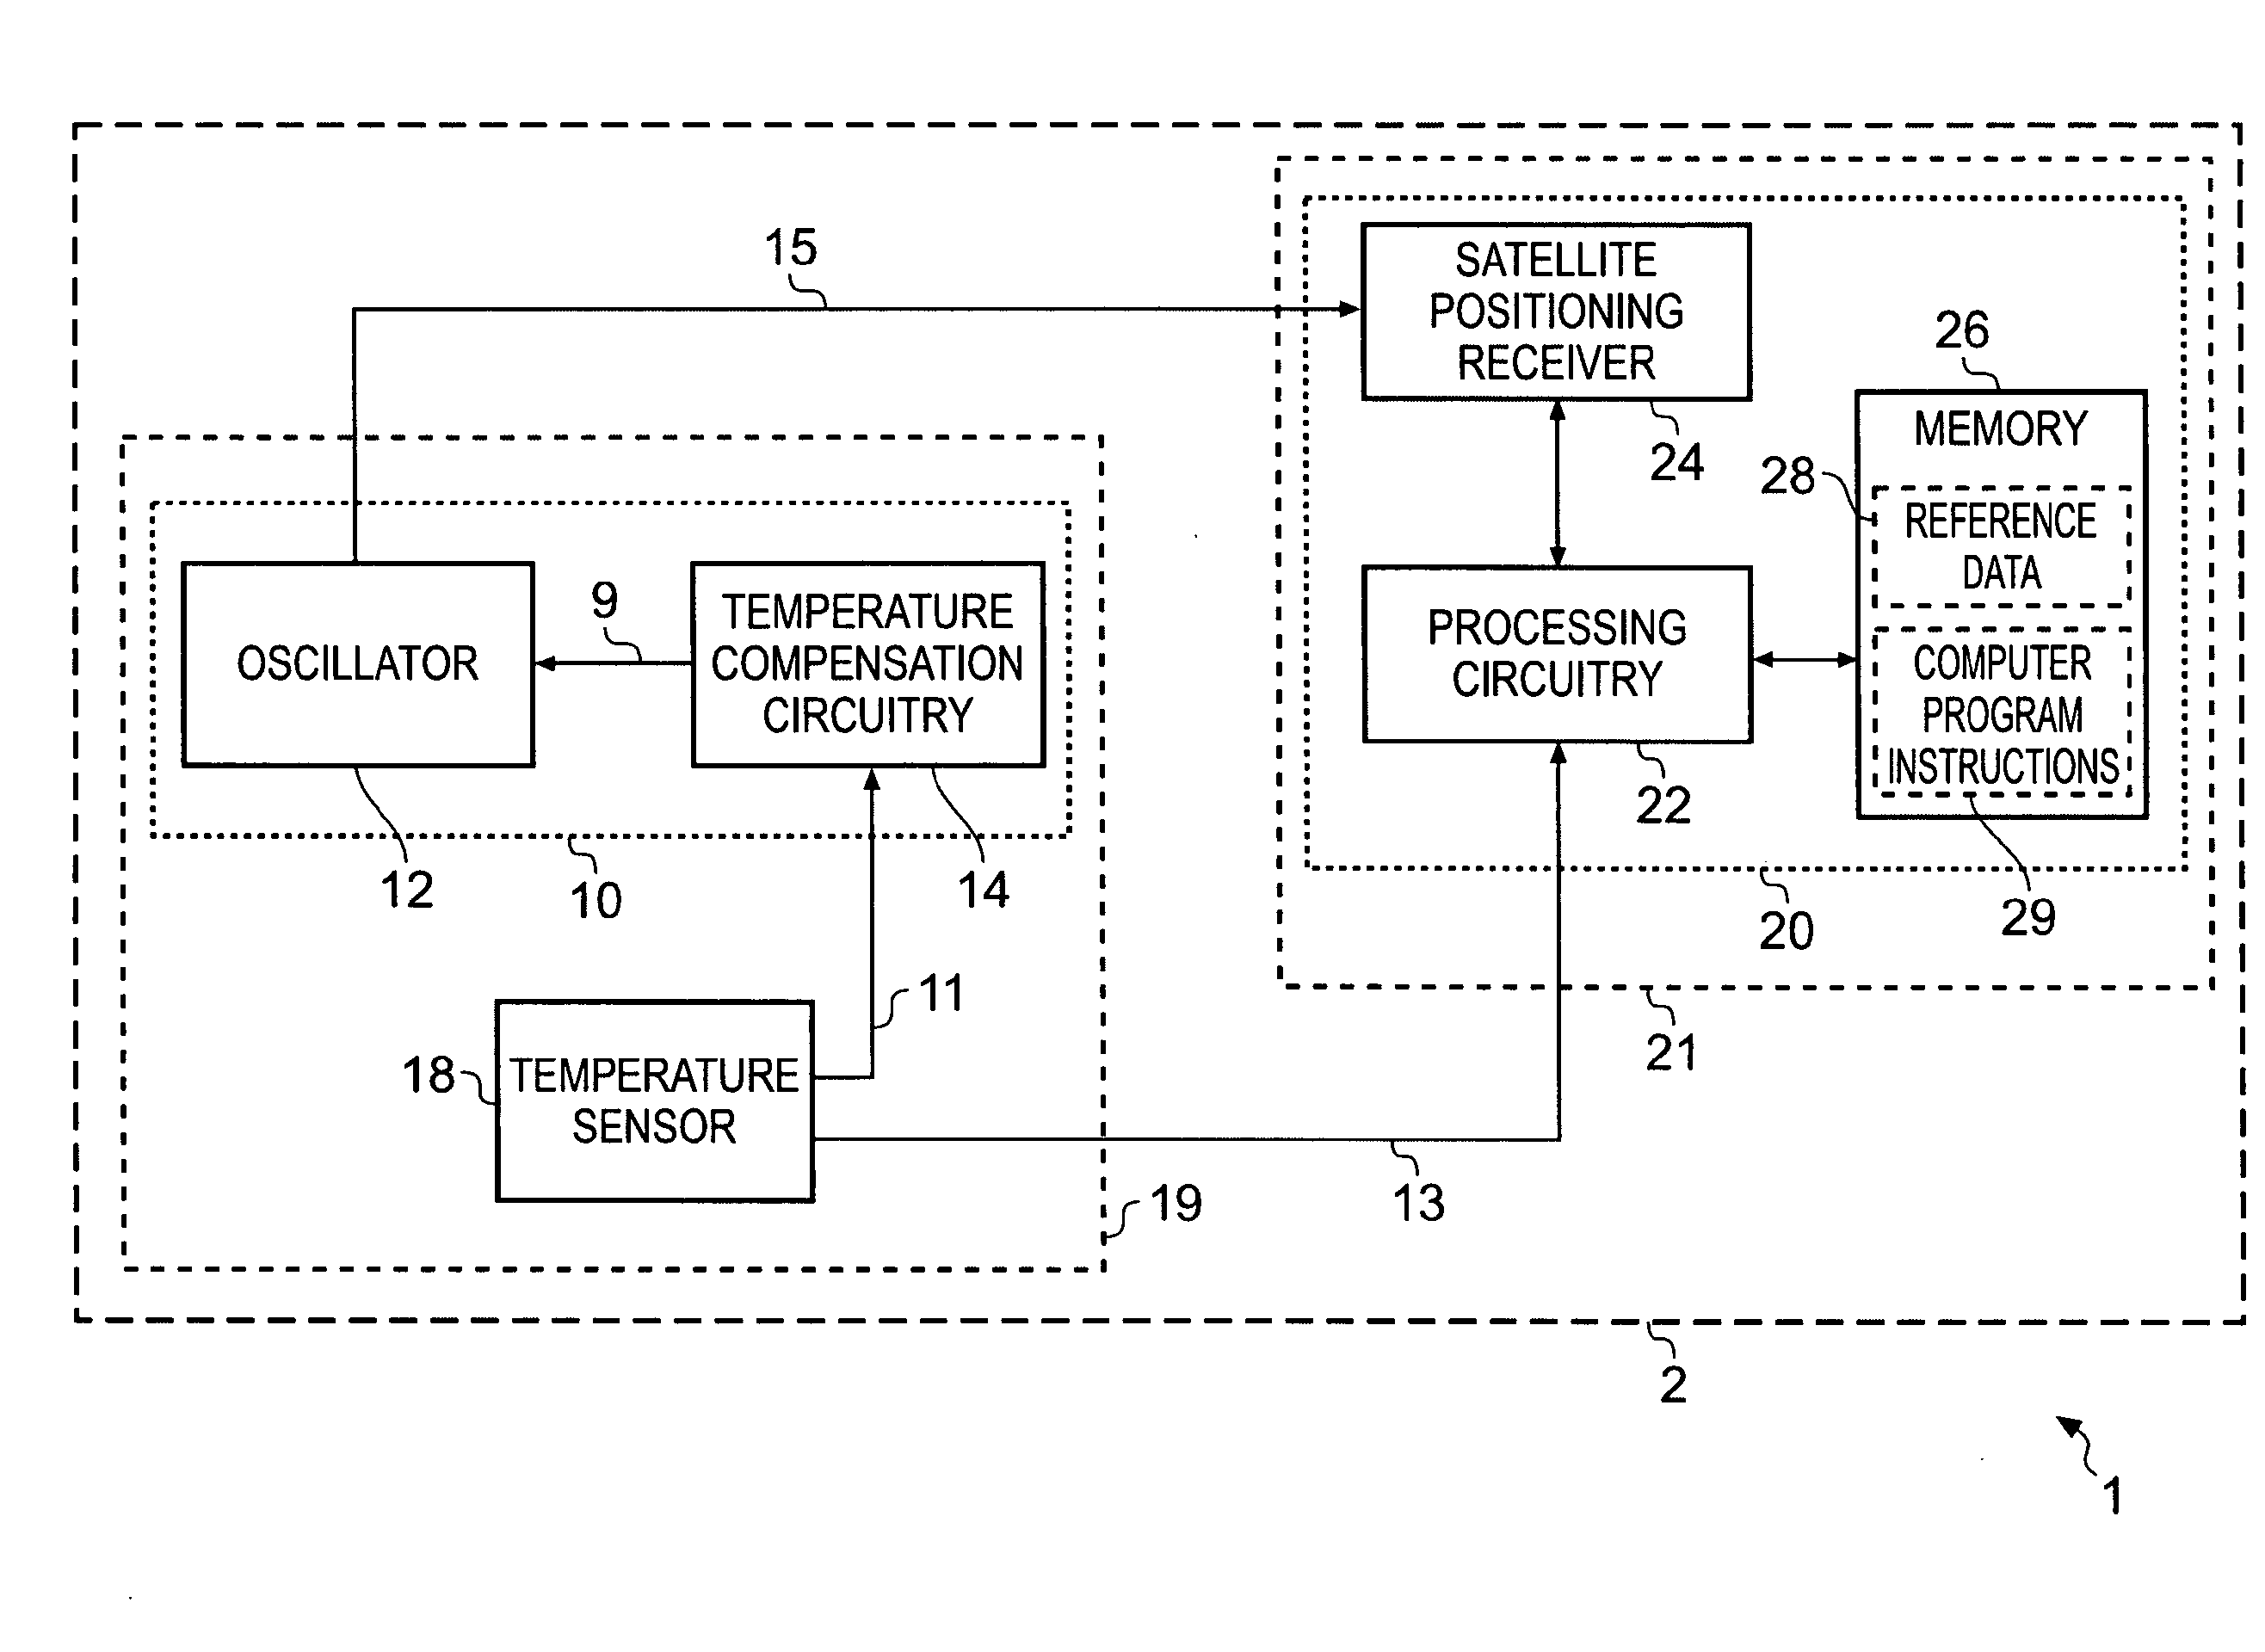 Temperature sensor for oscillator and for satellite positioning circuitry